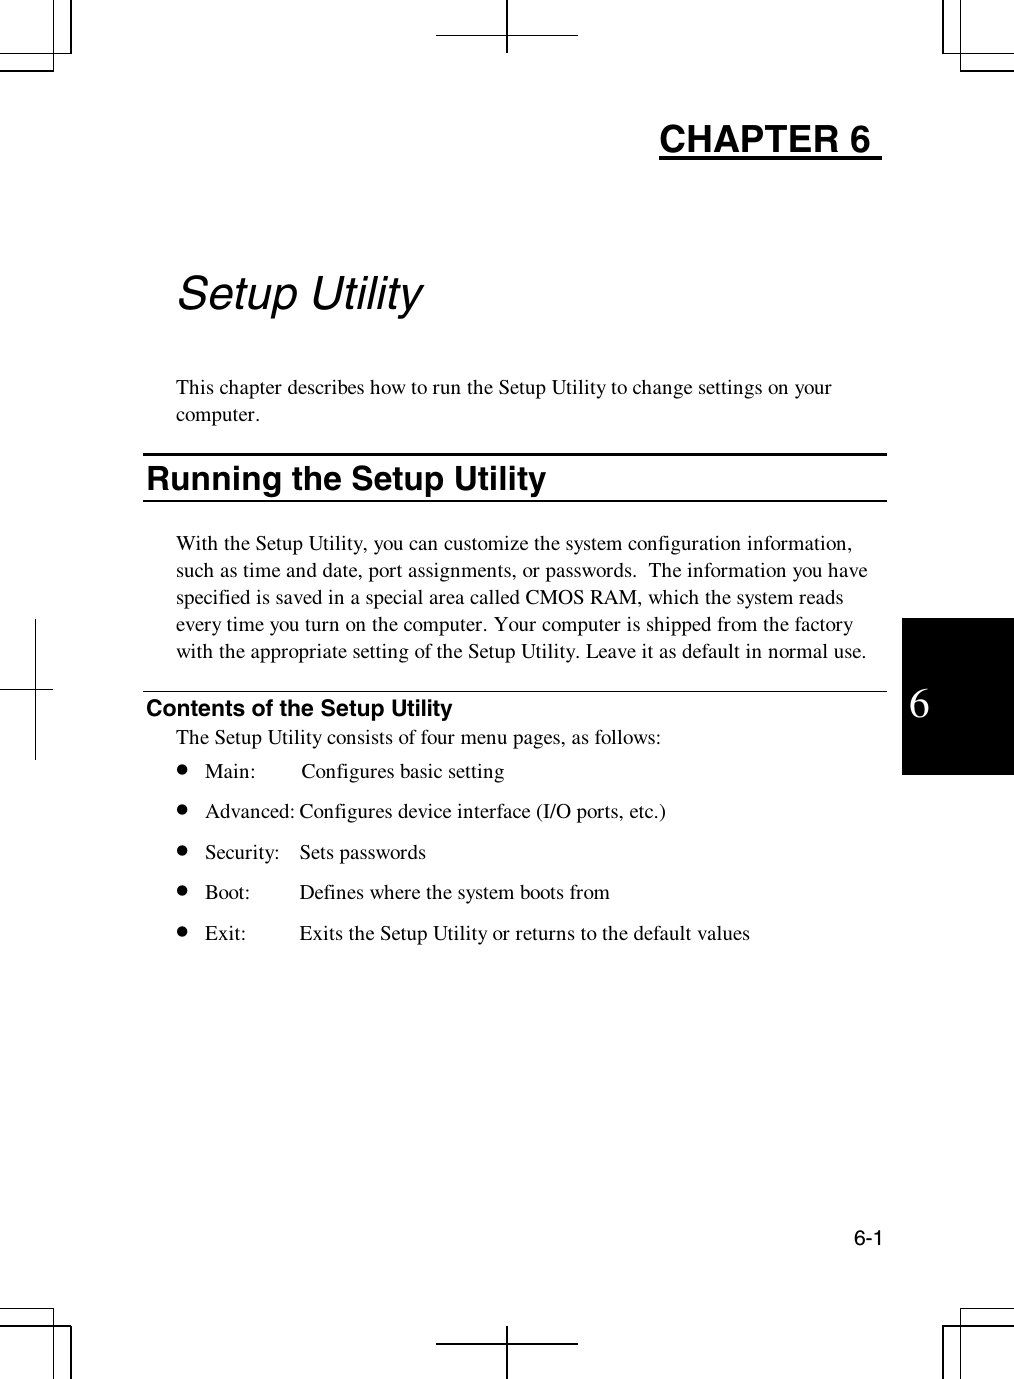 6-16CHAPTER 6Setup UtilityThis chapter describes how to run the Setup Utility to change settings on yourcomputer.Running the Setup UtilityWith the Setup Utility, you can customize the system configuration information,such as time and date, port assignments, or passwords. The information you havespecified is saved in a special area called CMOS RAM, which the system readsevery time you turn on the computer. Your computer is shipped from the factorywith the appropriate setting of the Setup Utility. Leave it as default in normal use.Contents of the Setup UtilityThe Setup Utility consists of four menu pages, as follows:•  Main: Configures basic setting•  Advanced: Configures device interface (I/O ports, etc.)•  Security: Sets passwords•  Boot: Defines where the system boots from•  Exit: Exits the Setup Utility or returns to the default values